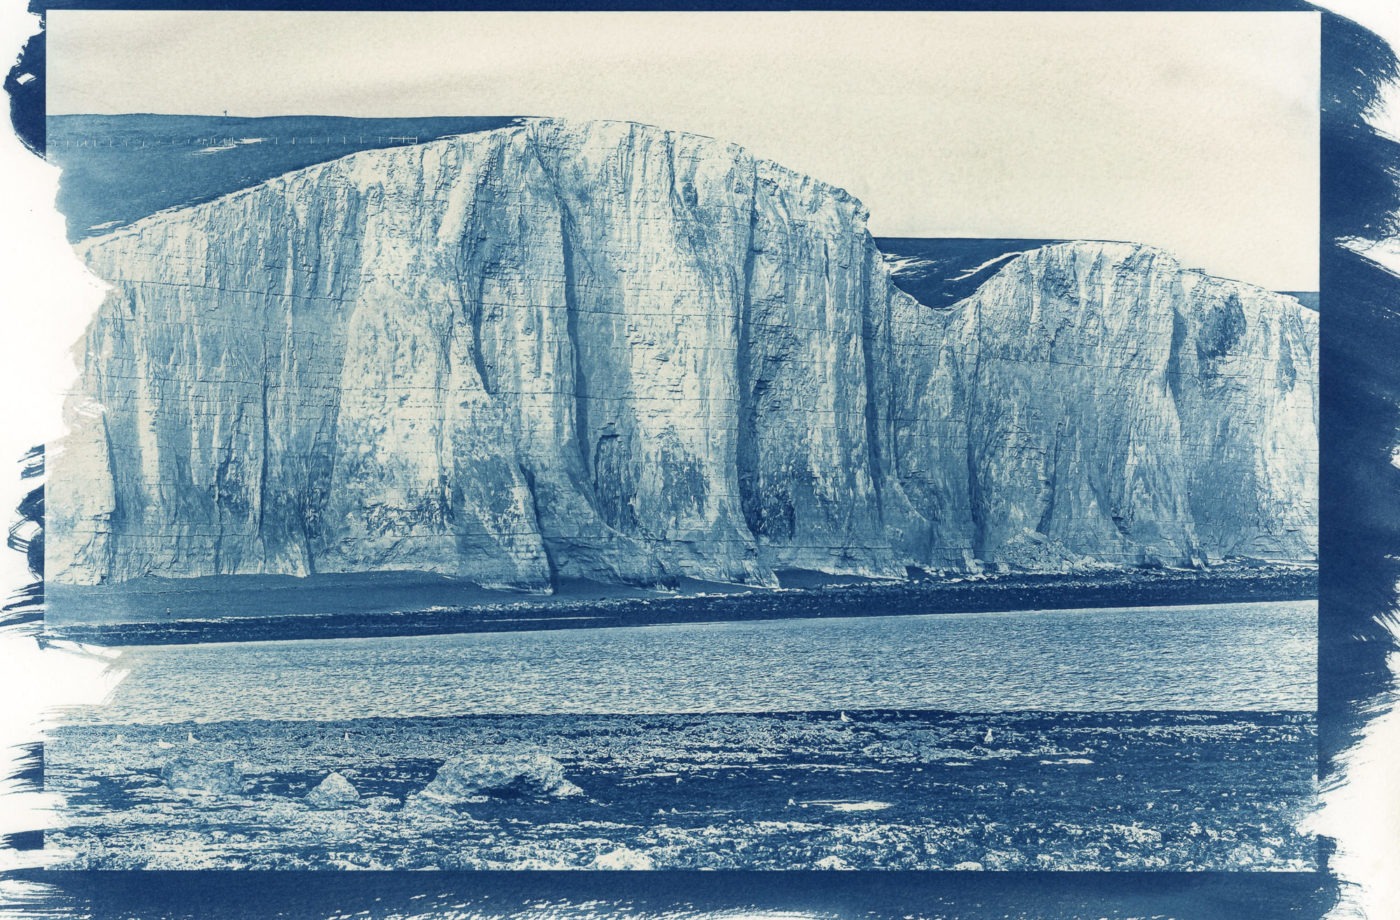 cyantype hand printed photograph of Seven Sisters coast line Sussex